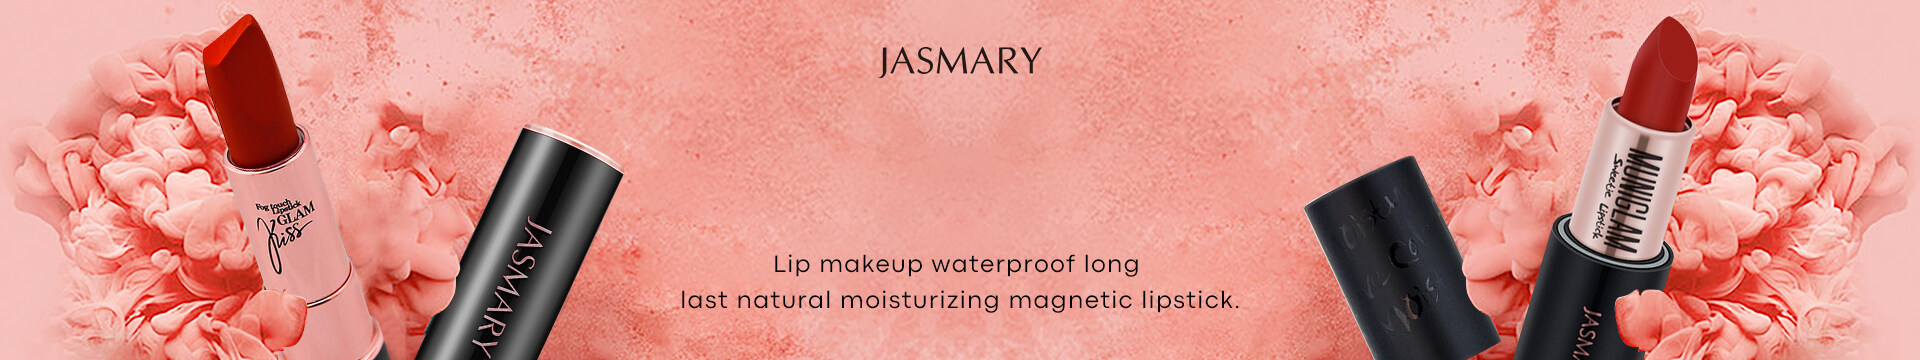 Waterproof Lasting Concealer Liquid Foundation Makeup Professional Full Cover Matte Base Make Up Cream,OEM Private Label Deep Cleaning Best Price Mild Eye & Lip Makeup Remover,JASMARY New Shine Red Liquid Foundation Waterproof Moisturizing Improve Skin Tumbler Liquid Foundation,2019 JASMARY New Product Brightening and Concealing Brilliant Red Highlighting Powder,8-Color Eye Shadow Palette With Makeup Tools Kit Matte Shimmer Cosmetic High Pigmented Vegan For Daily And Ball